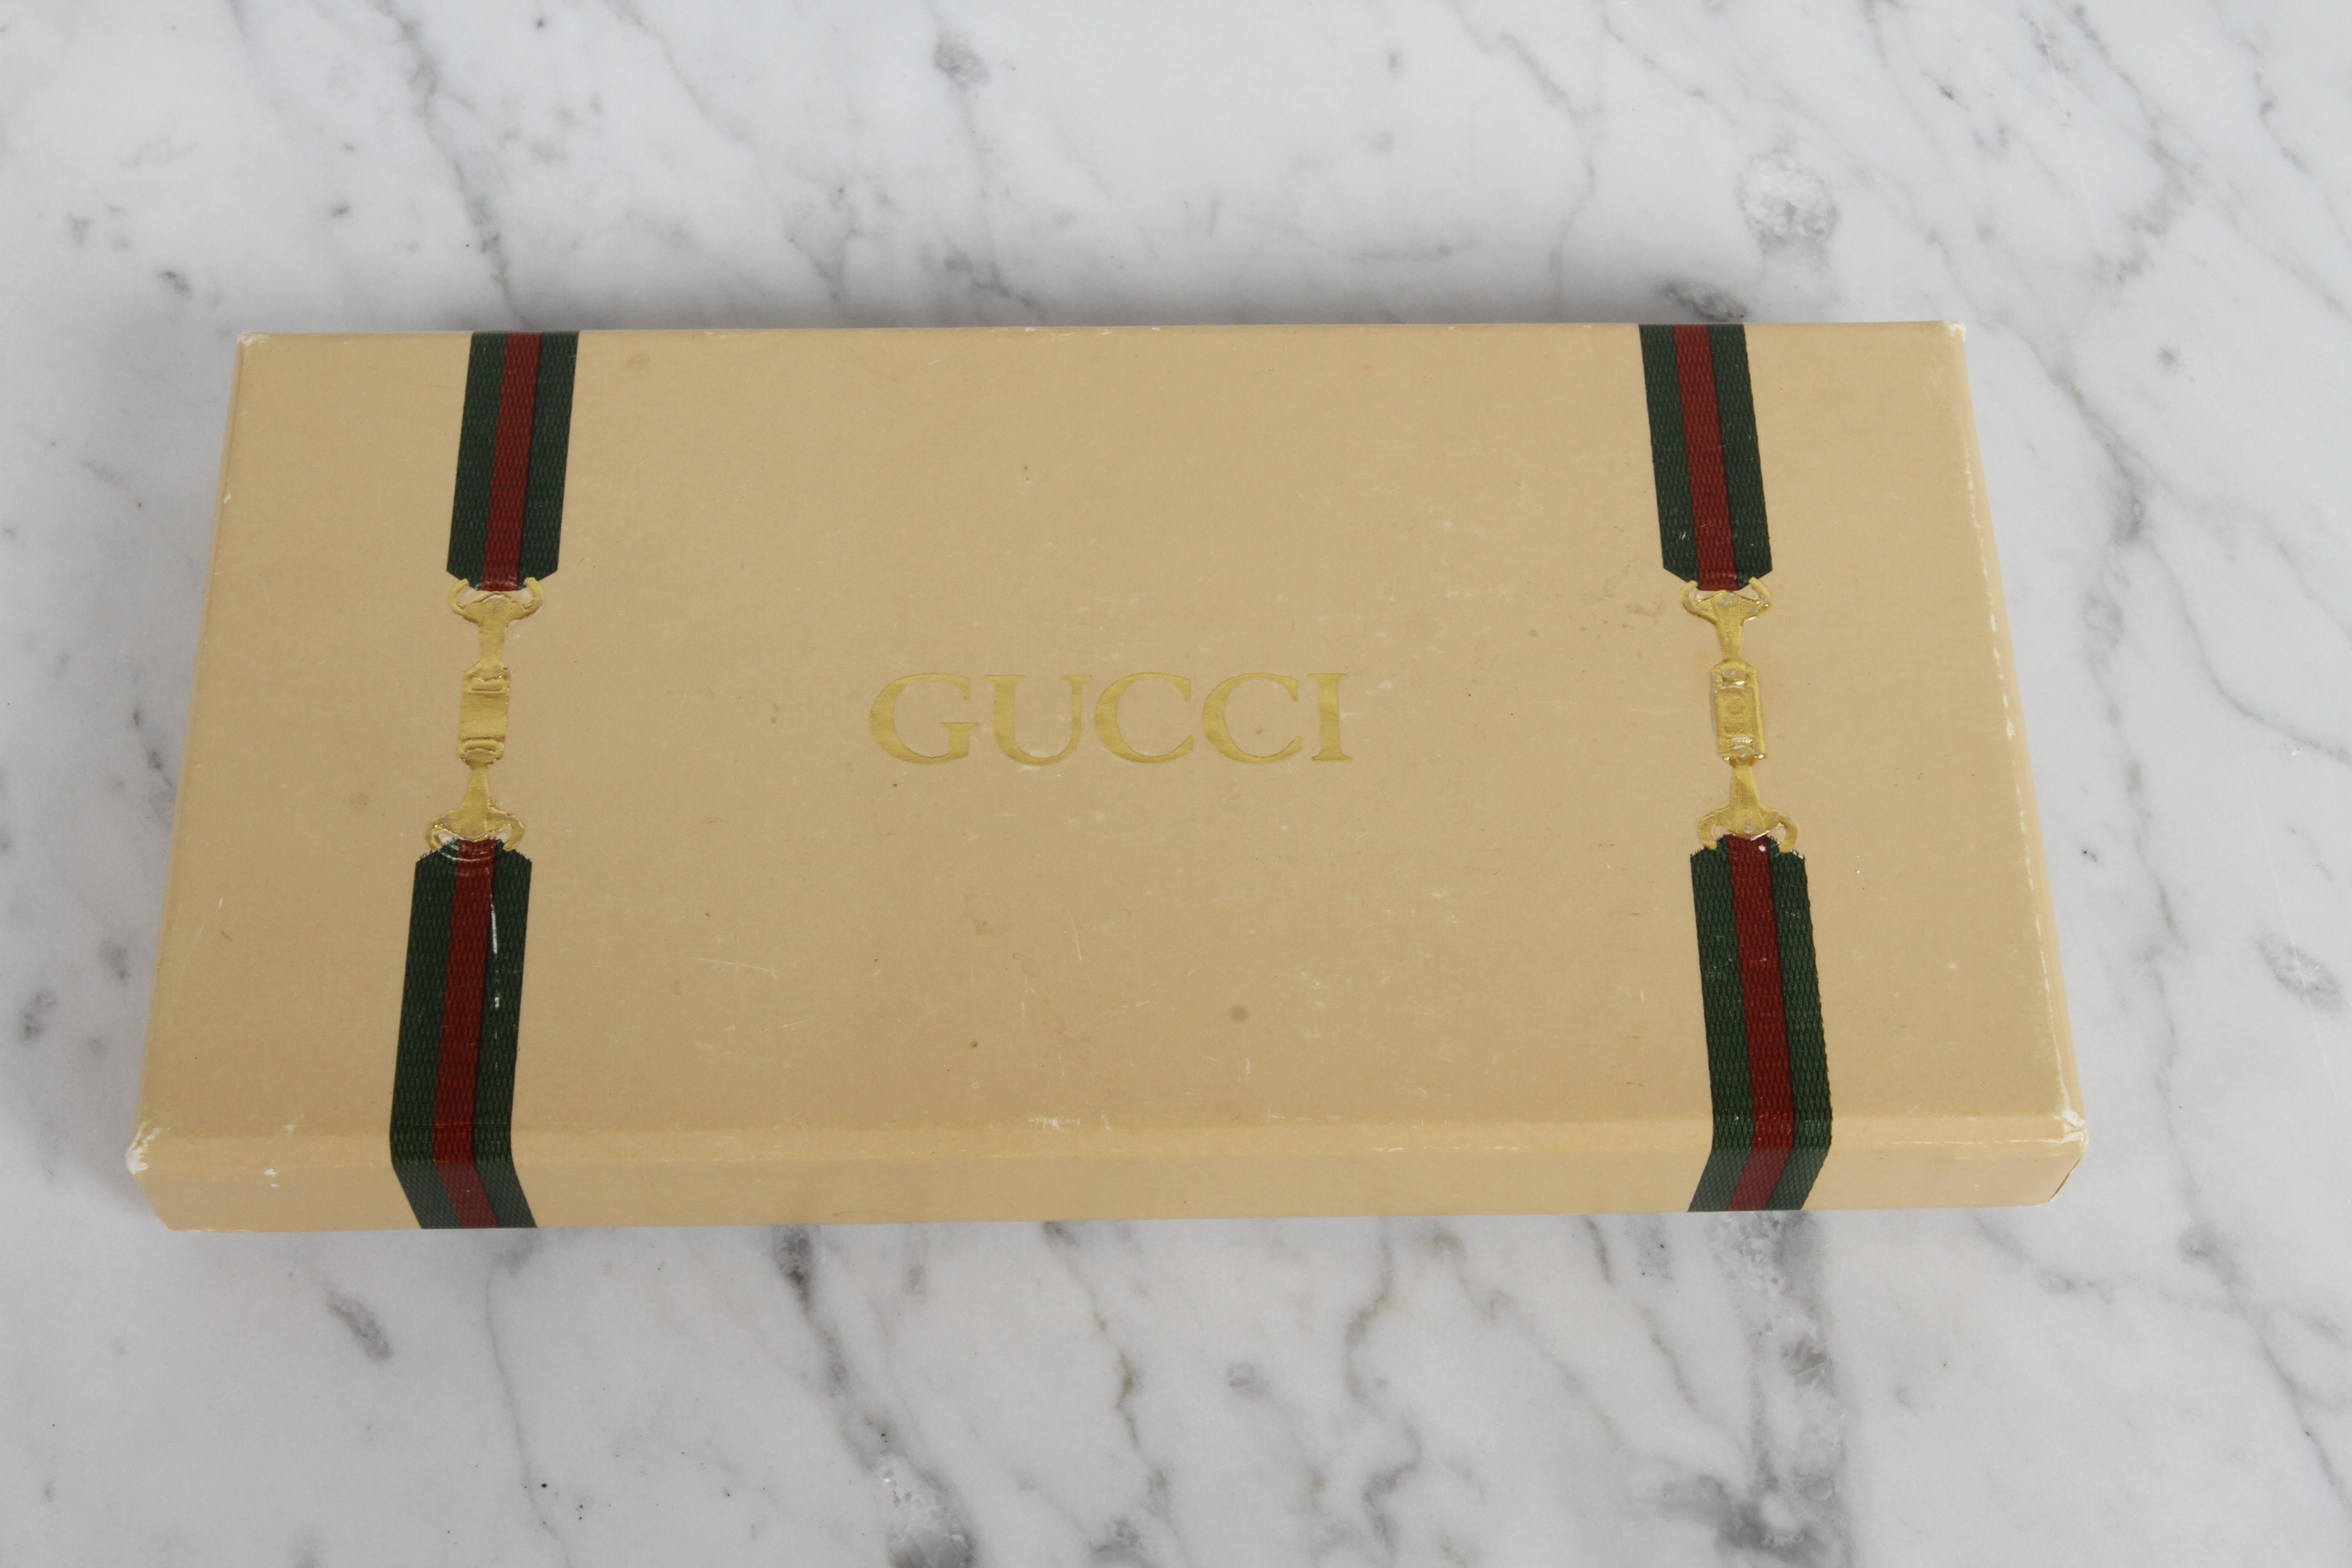 From the exuberant 1980s, this new old stock, in the original box vintage Gucci gold plated perfume bottle necklace / pendant is ready to be worn for the first time. Perfume tube has double GG at top, classic red & green stripe and Gucci made in